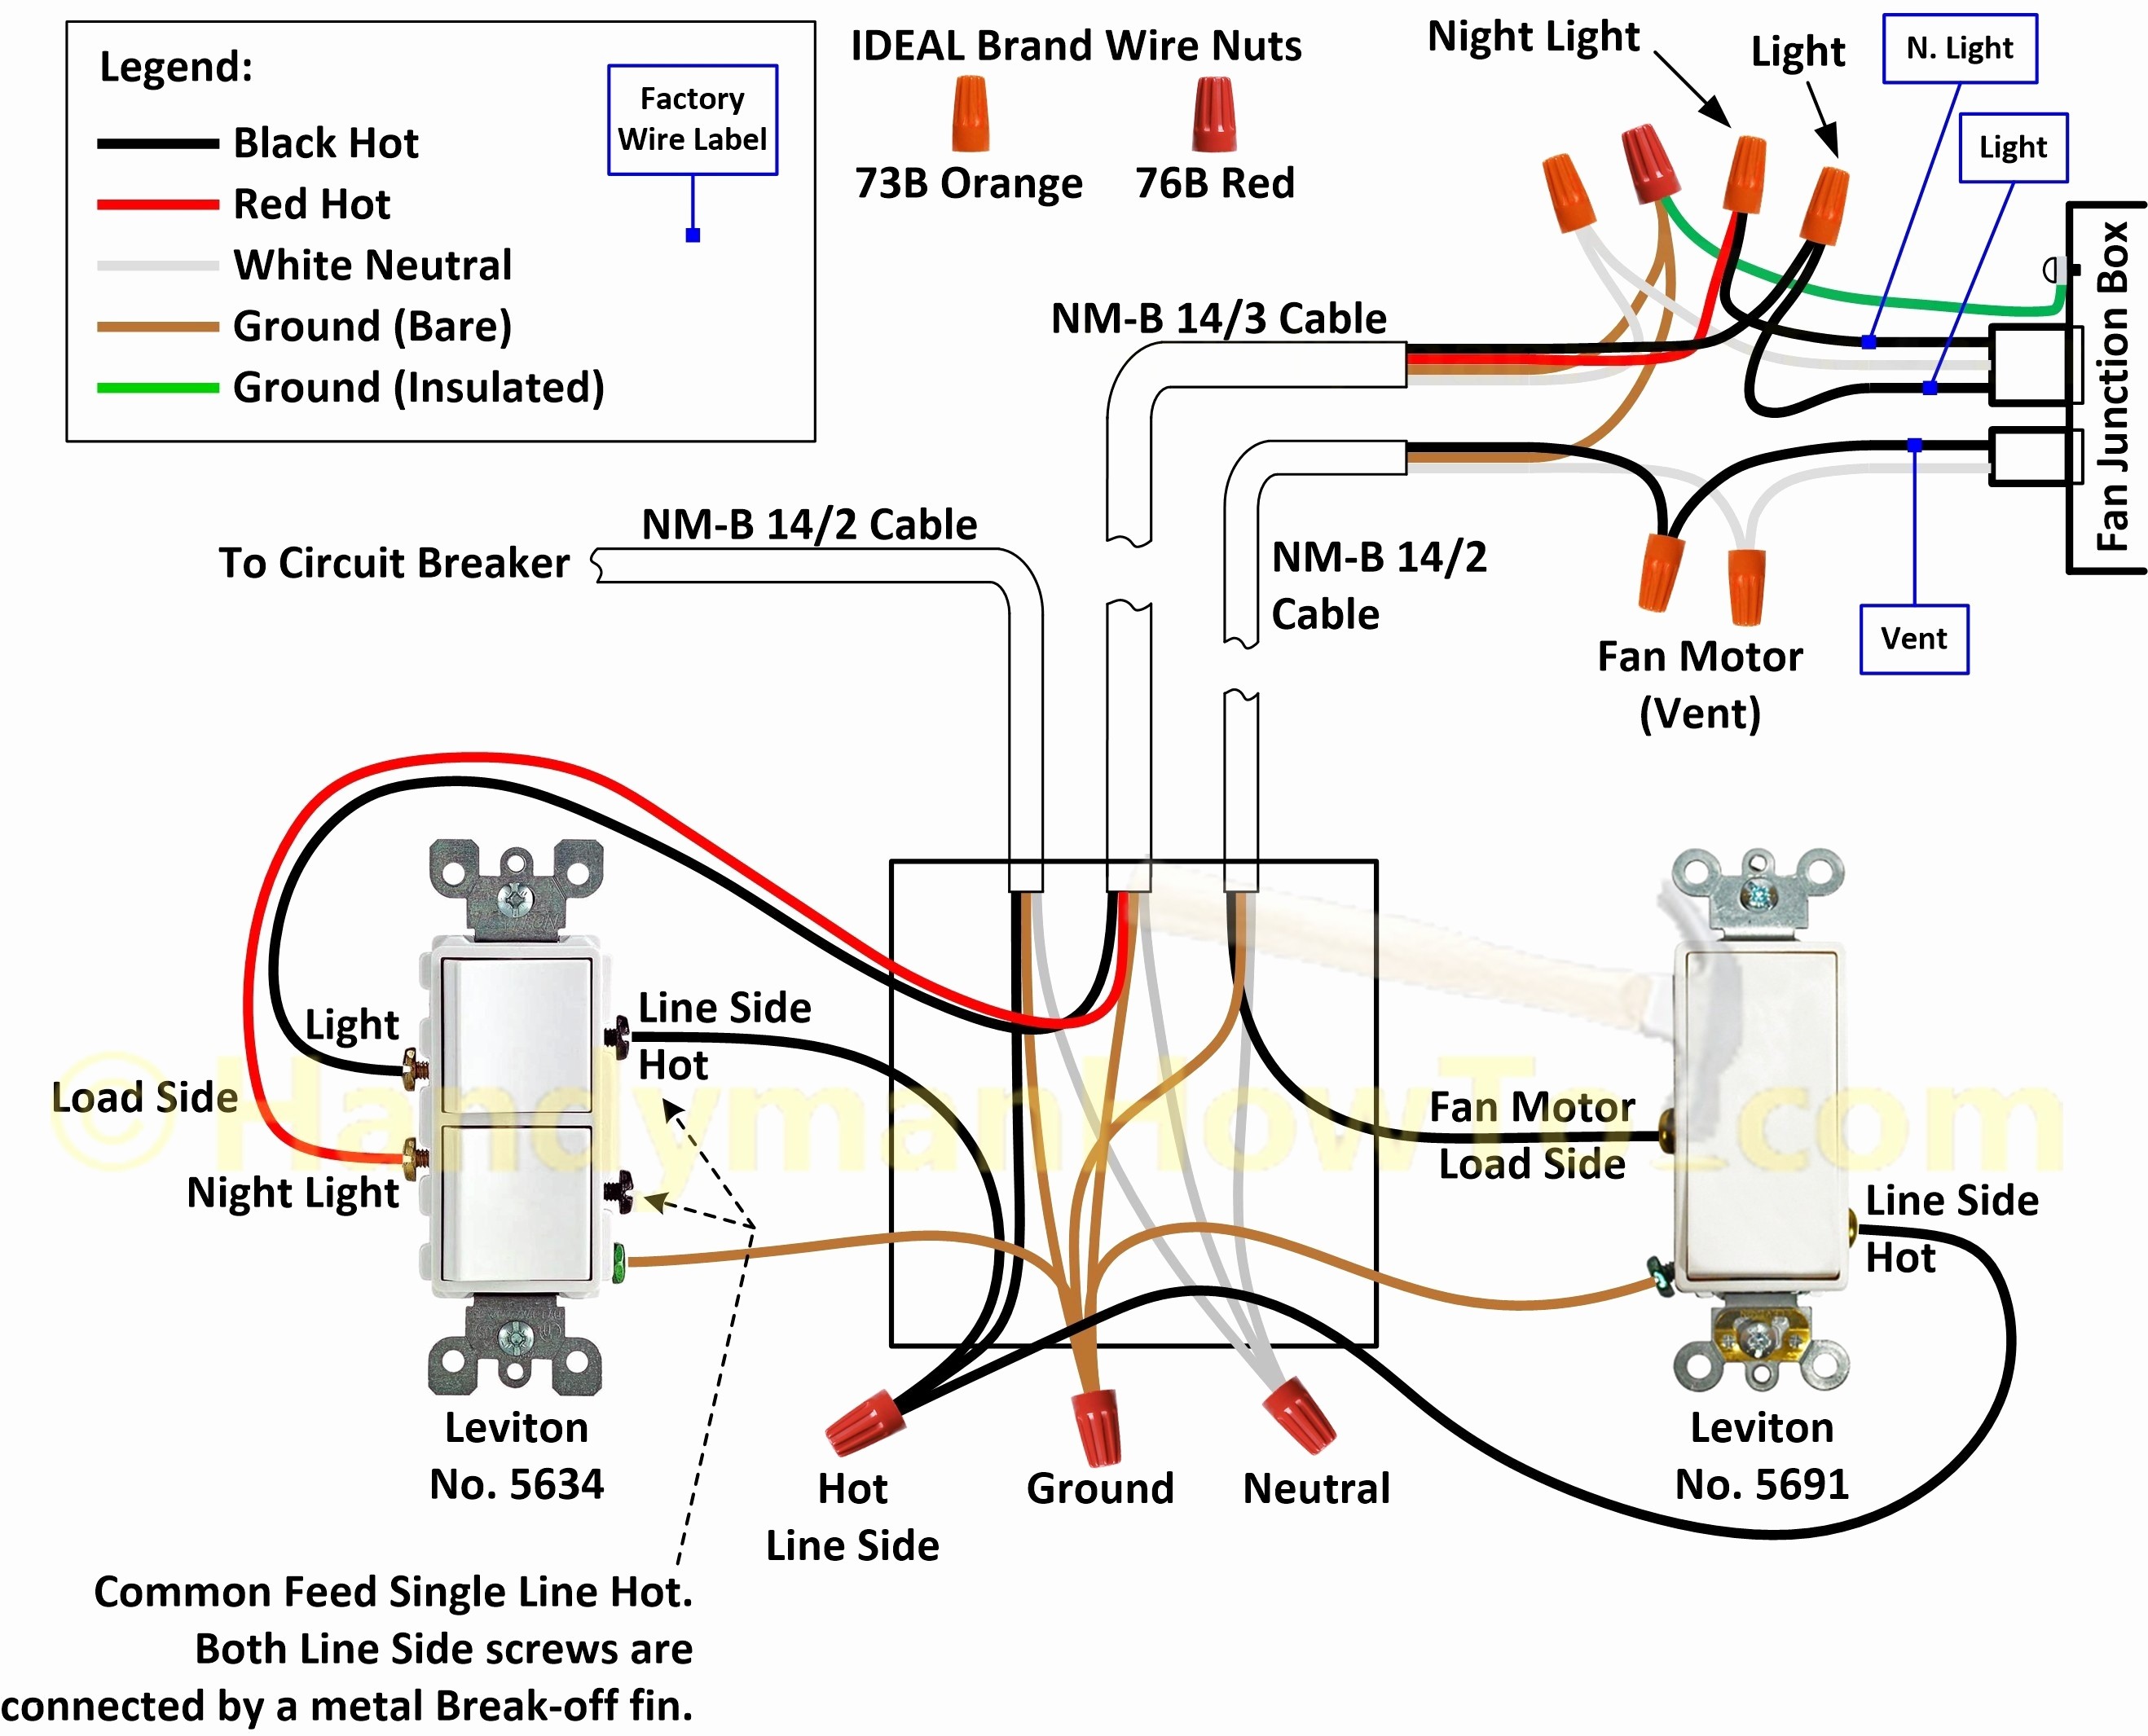 Wet Switch Wiring Diagram New Light Pull Chain Switch Wiring Diagram Light Free Image About Wiring